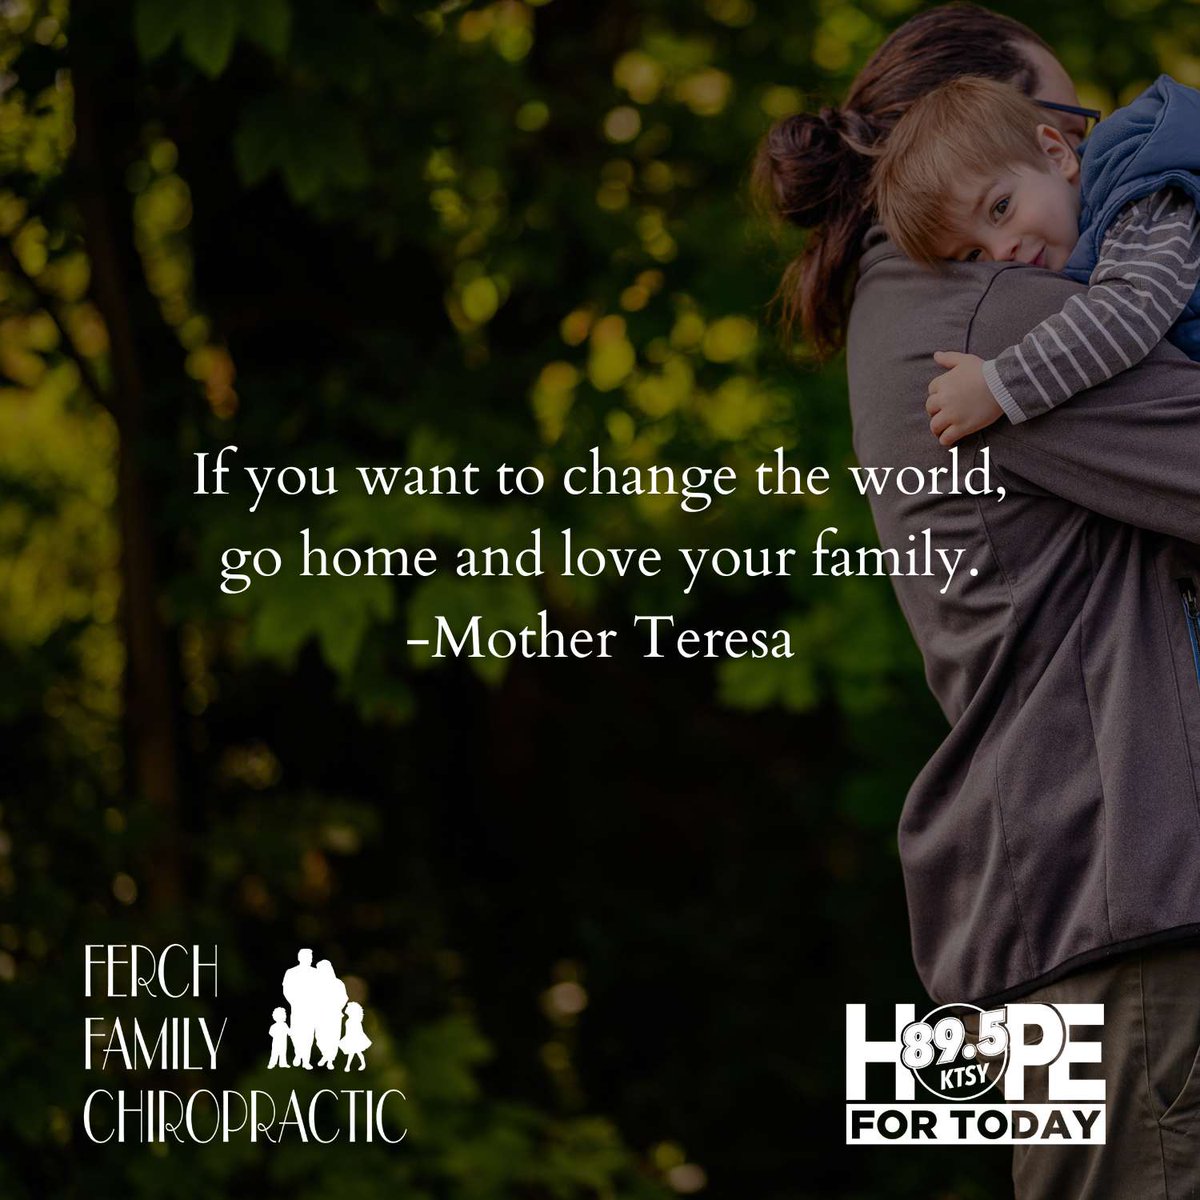 Lord, help us love our families well. #hopefortoday #choosehope #bible #scripture